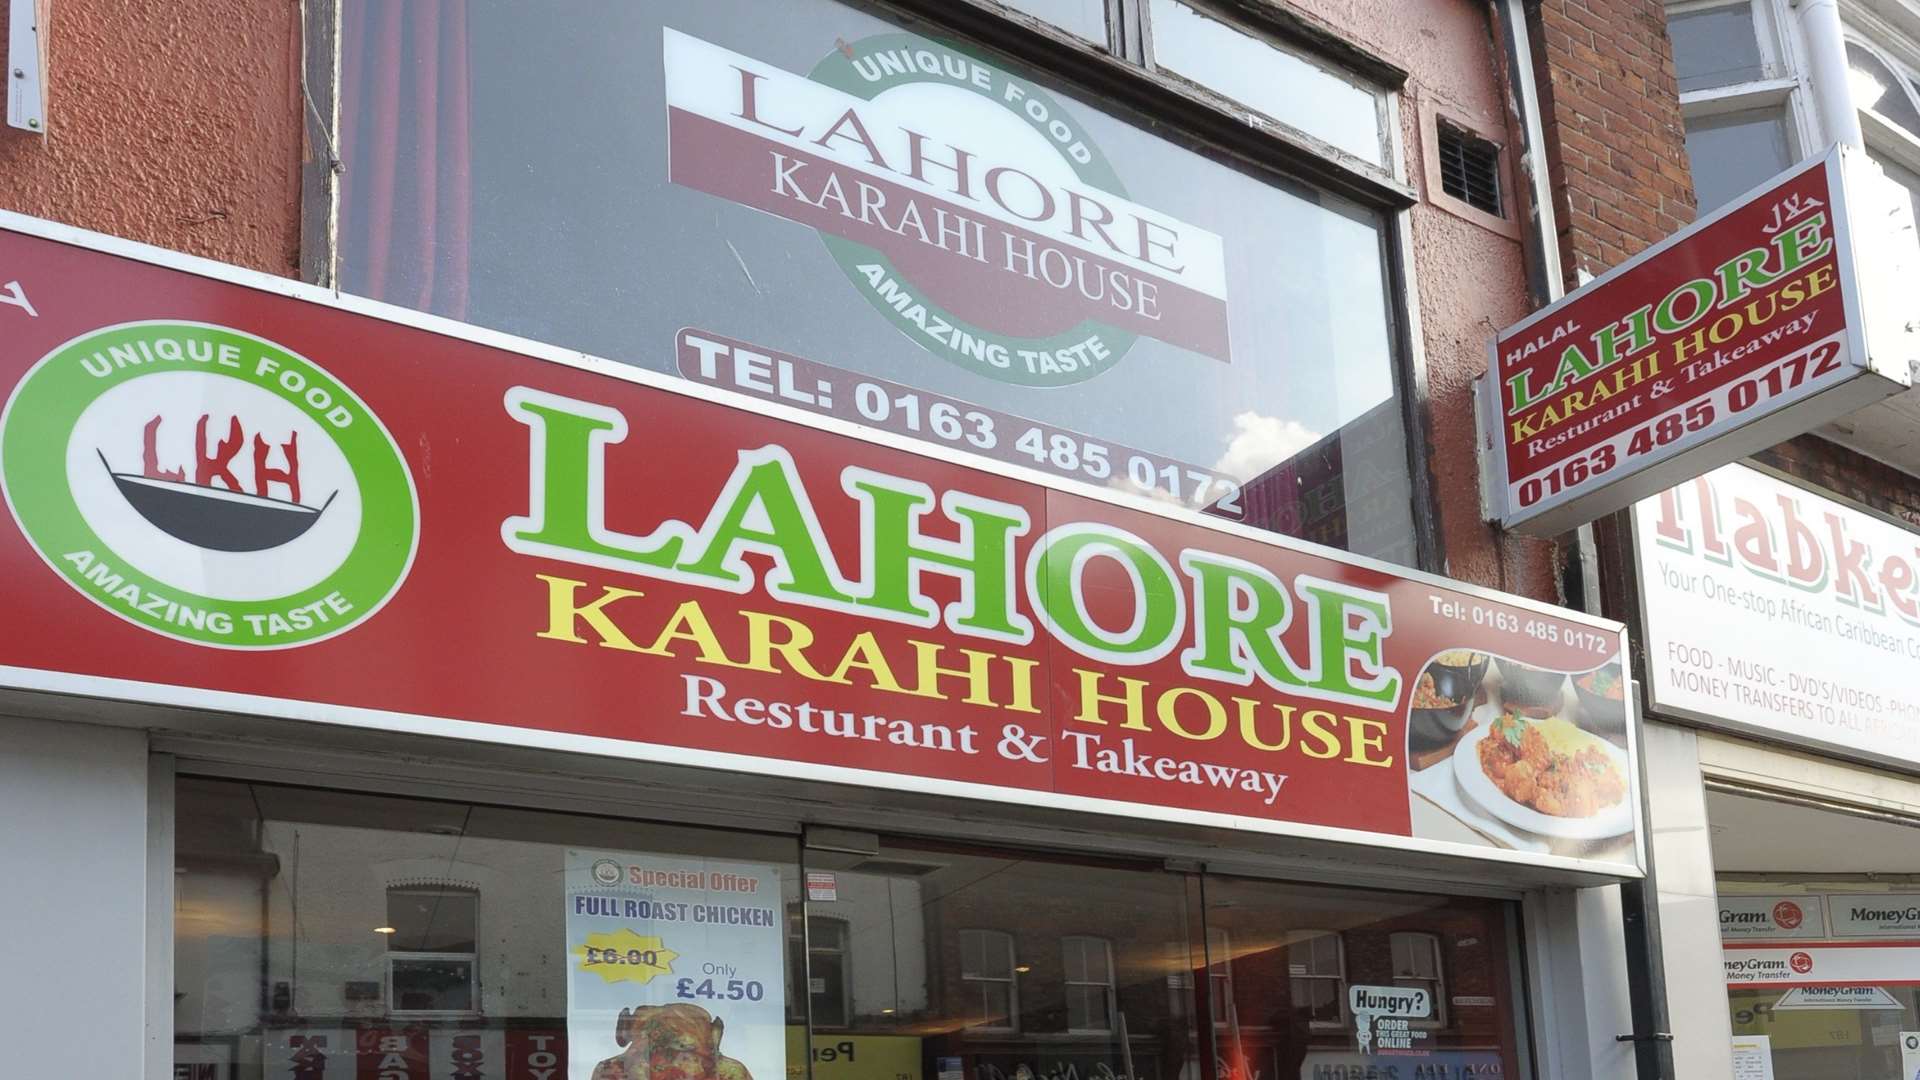 The boss of the Lahore takeaway in Gillingham was fined